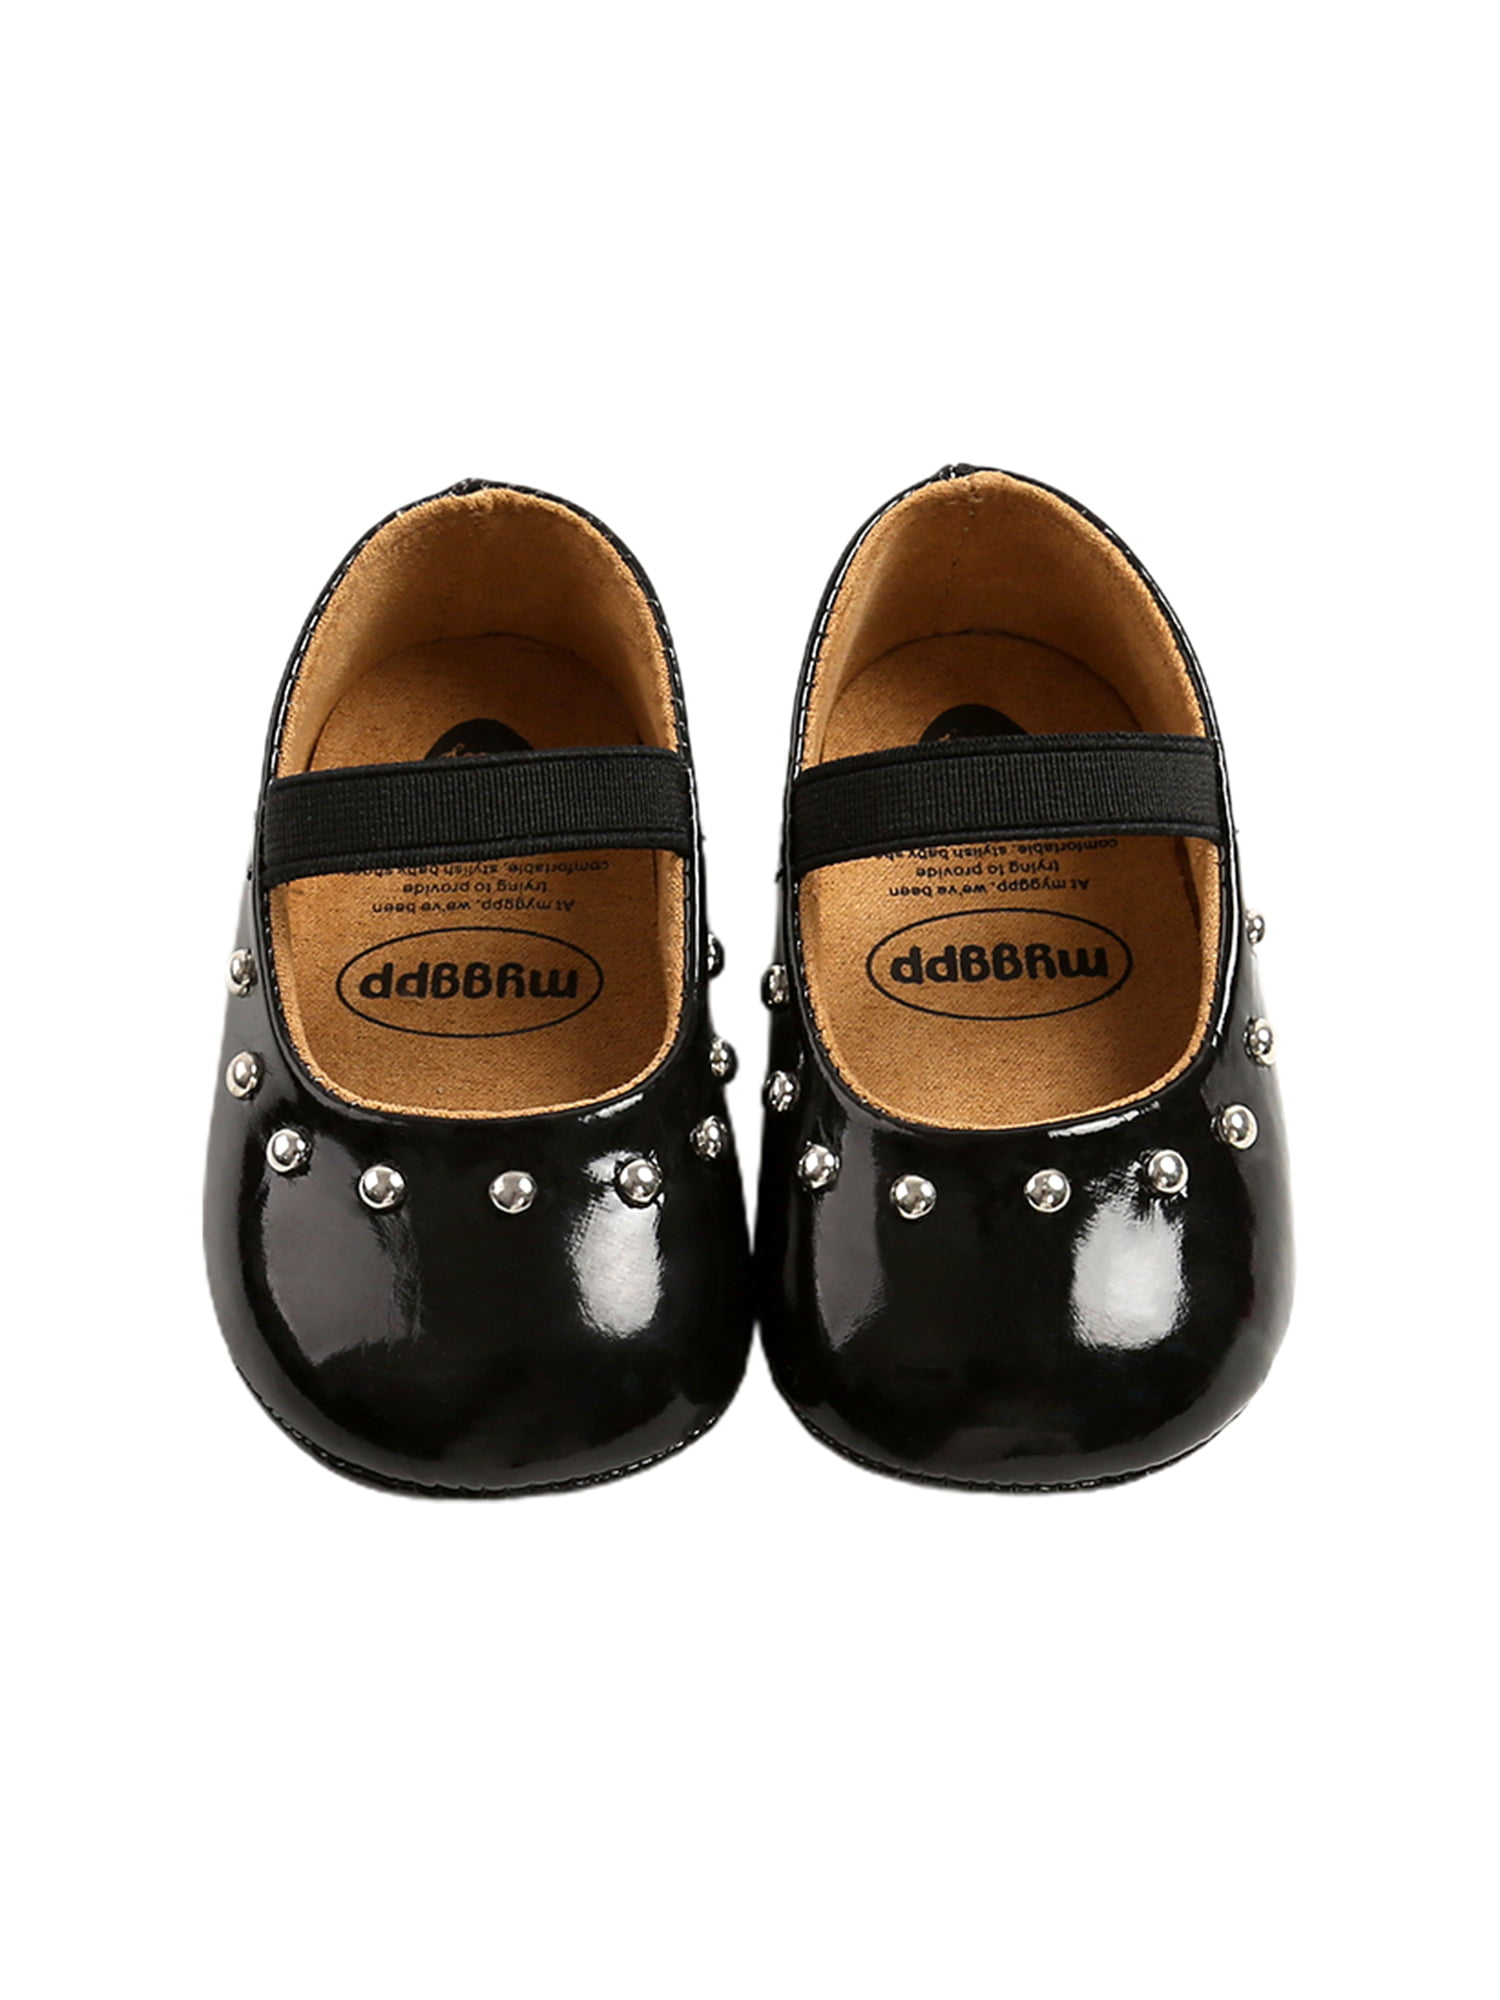 REAL Leather Soft Sole Baby Shoes Girls Toddler Black with Hearts 